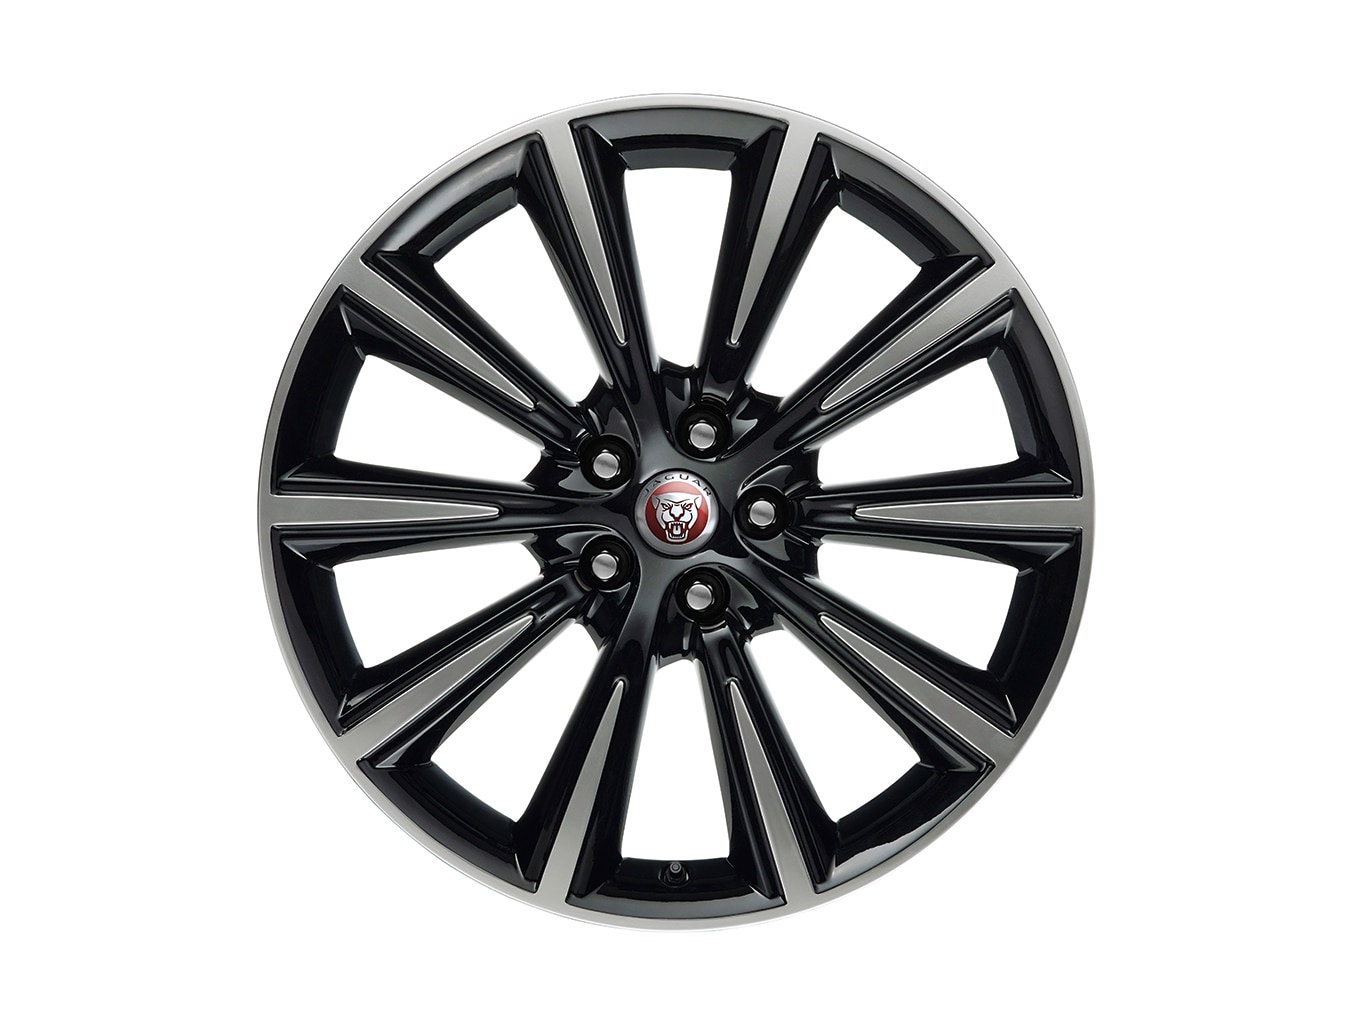 19" Style 1026, Diamond Turned with Gloss Black contrast, front image